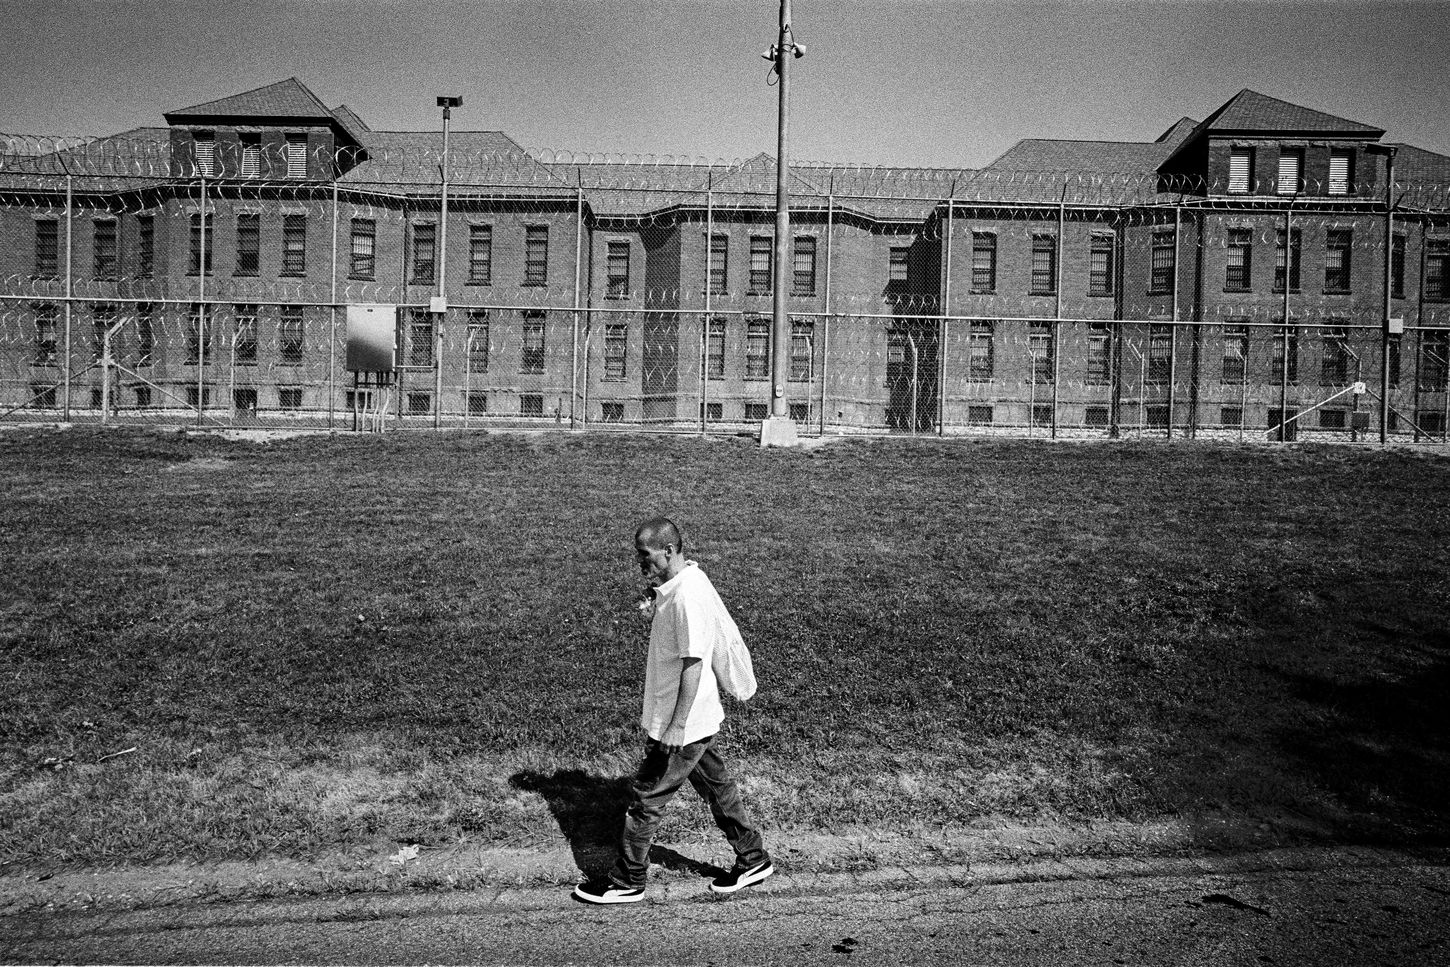 black & white photo of a prisoner walking away from his former place of incarceration, Fishkill Correctional Facility in New York